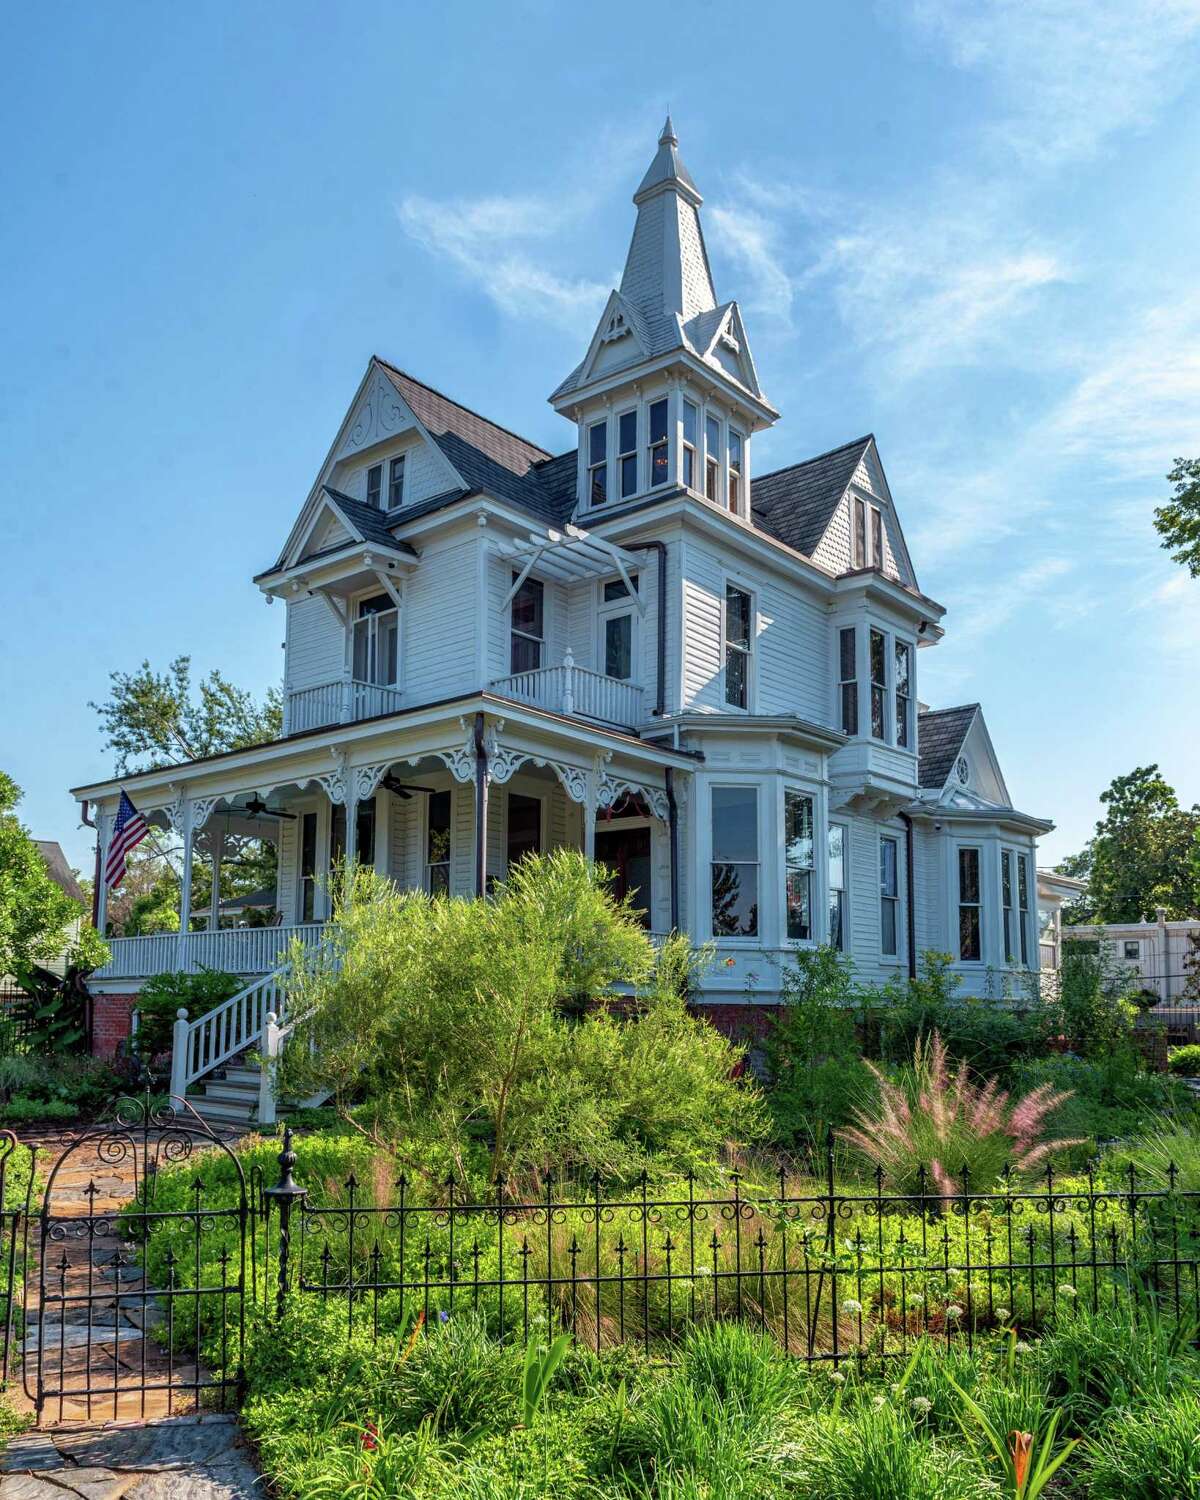 This Harvard Street home began its life in the late 19th century as one of a handful of spec homes that launched the new Houston Heights neighborhood. The home’s new owners, Jan Rynda Greer and Tyson Greer, have finished a restoration of the home.